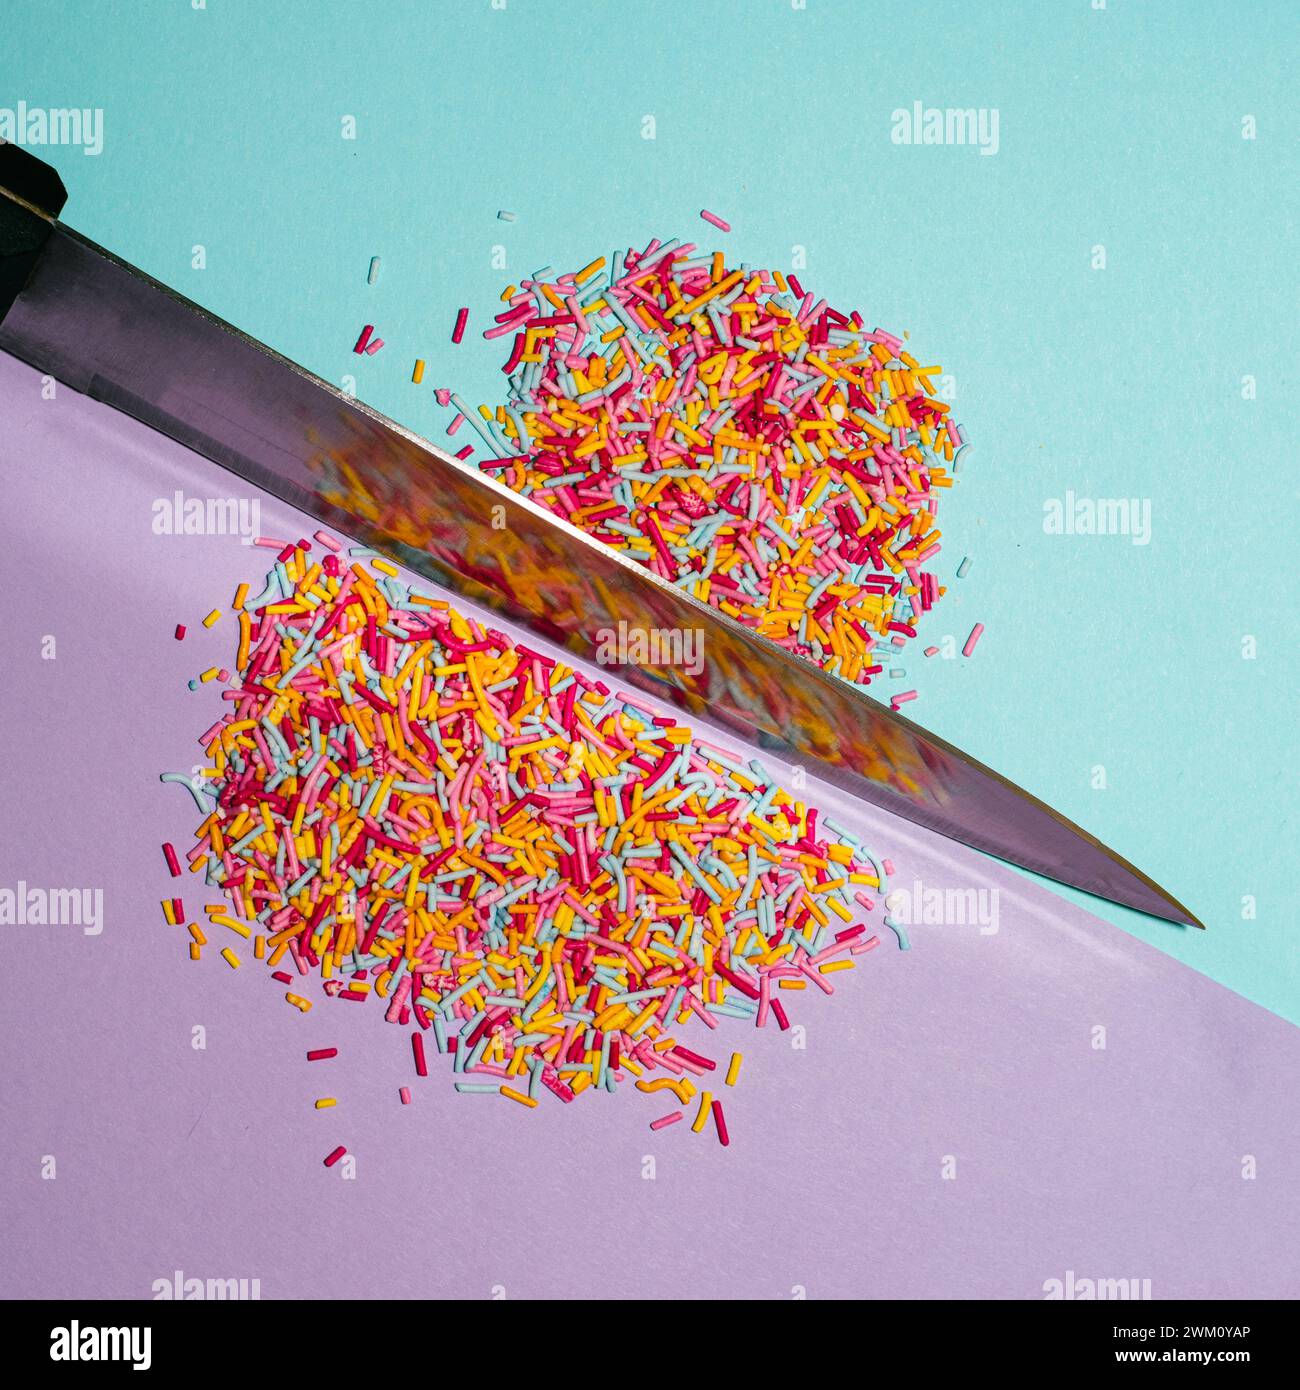 Knife cutting colorful sprinkles. Creative food concept. Flat lay. Stock Photo